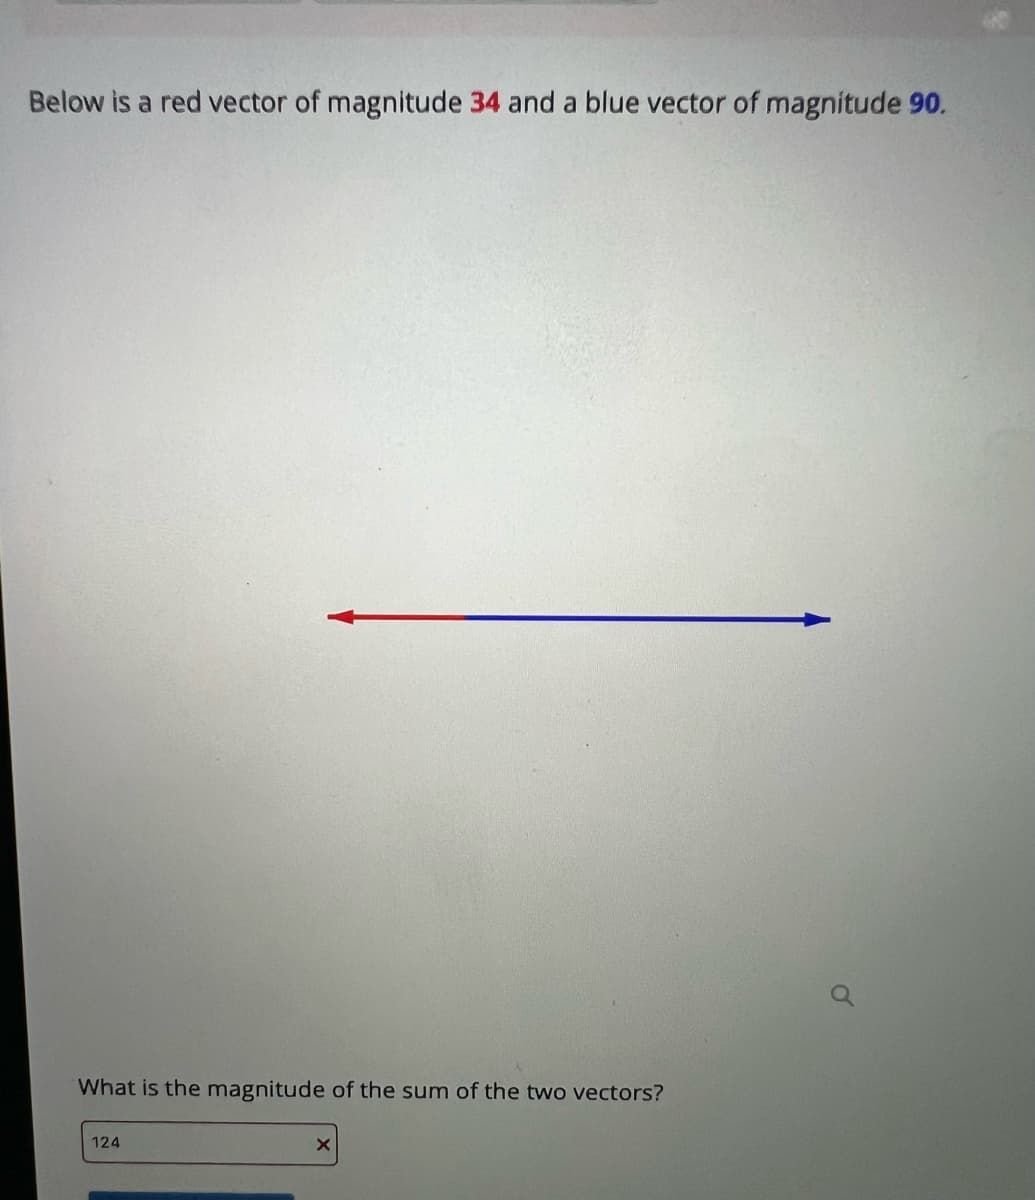 Below is a red vector of magnitude 34 and a blue vector of magnitude 90.
What is the magnitude of the sum of the two vectors?
124